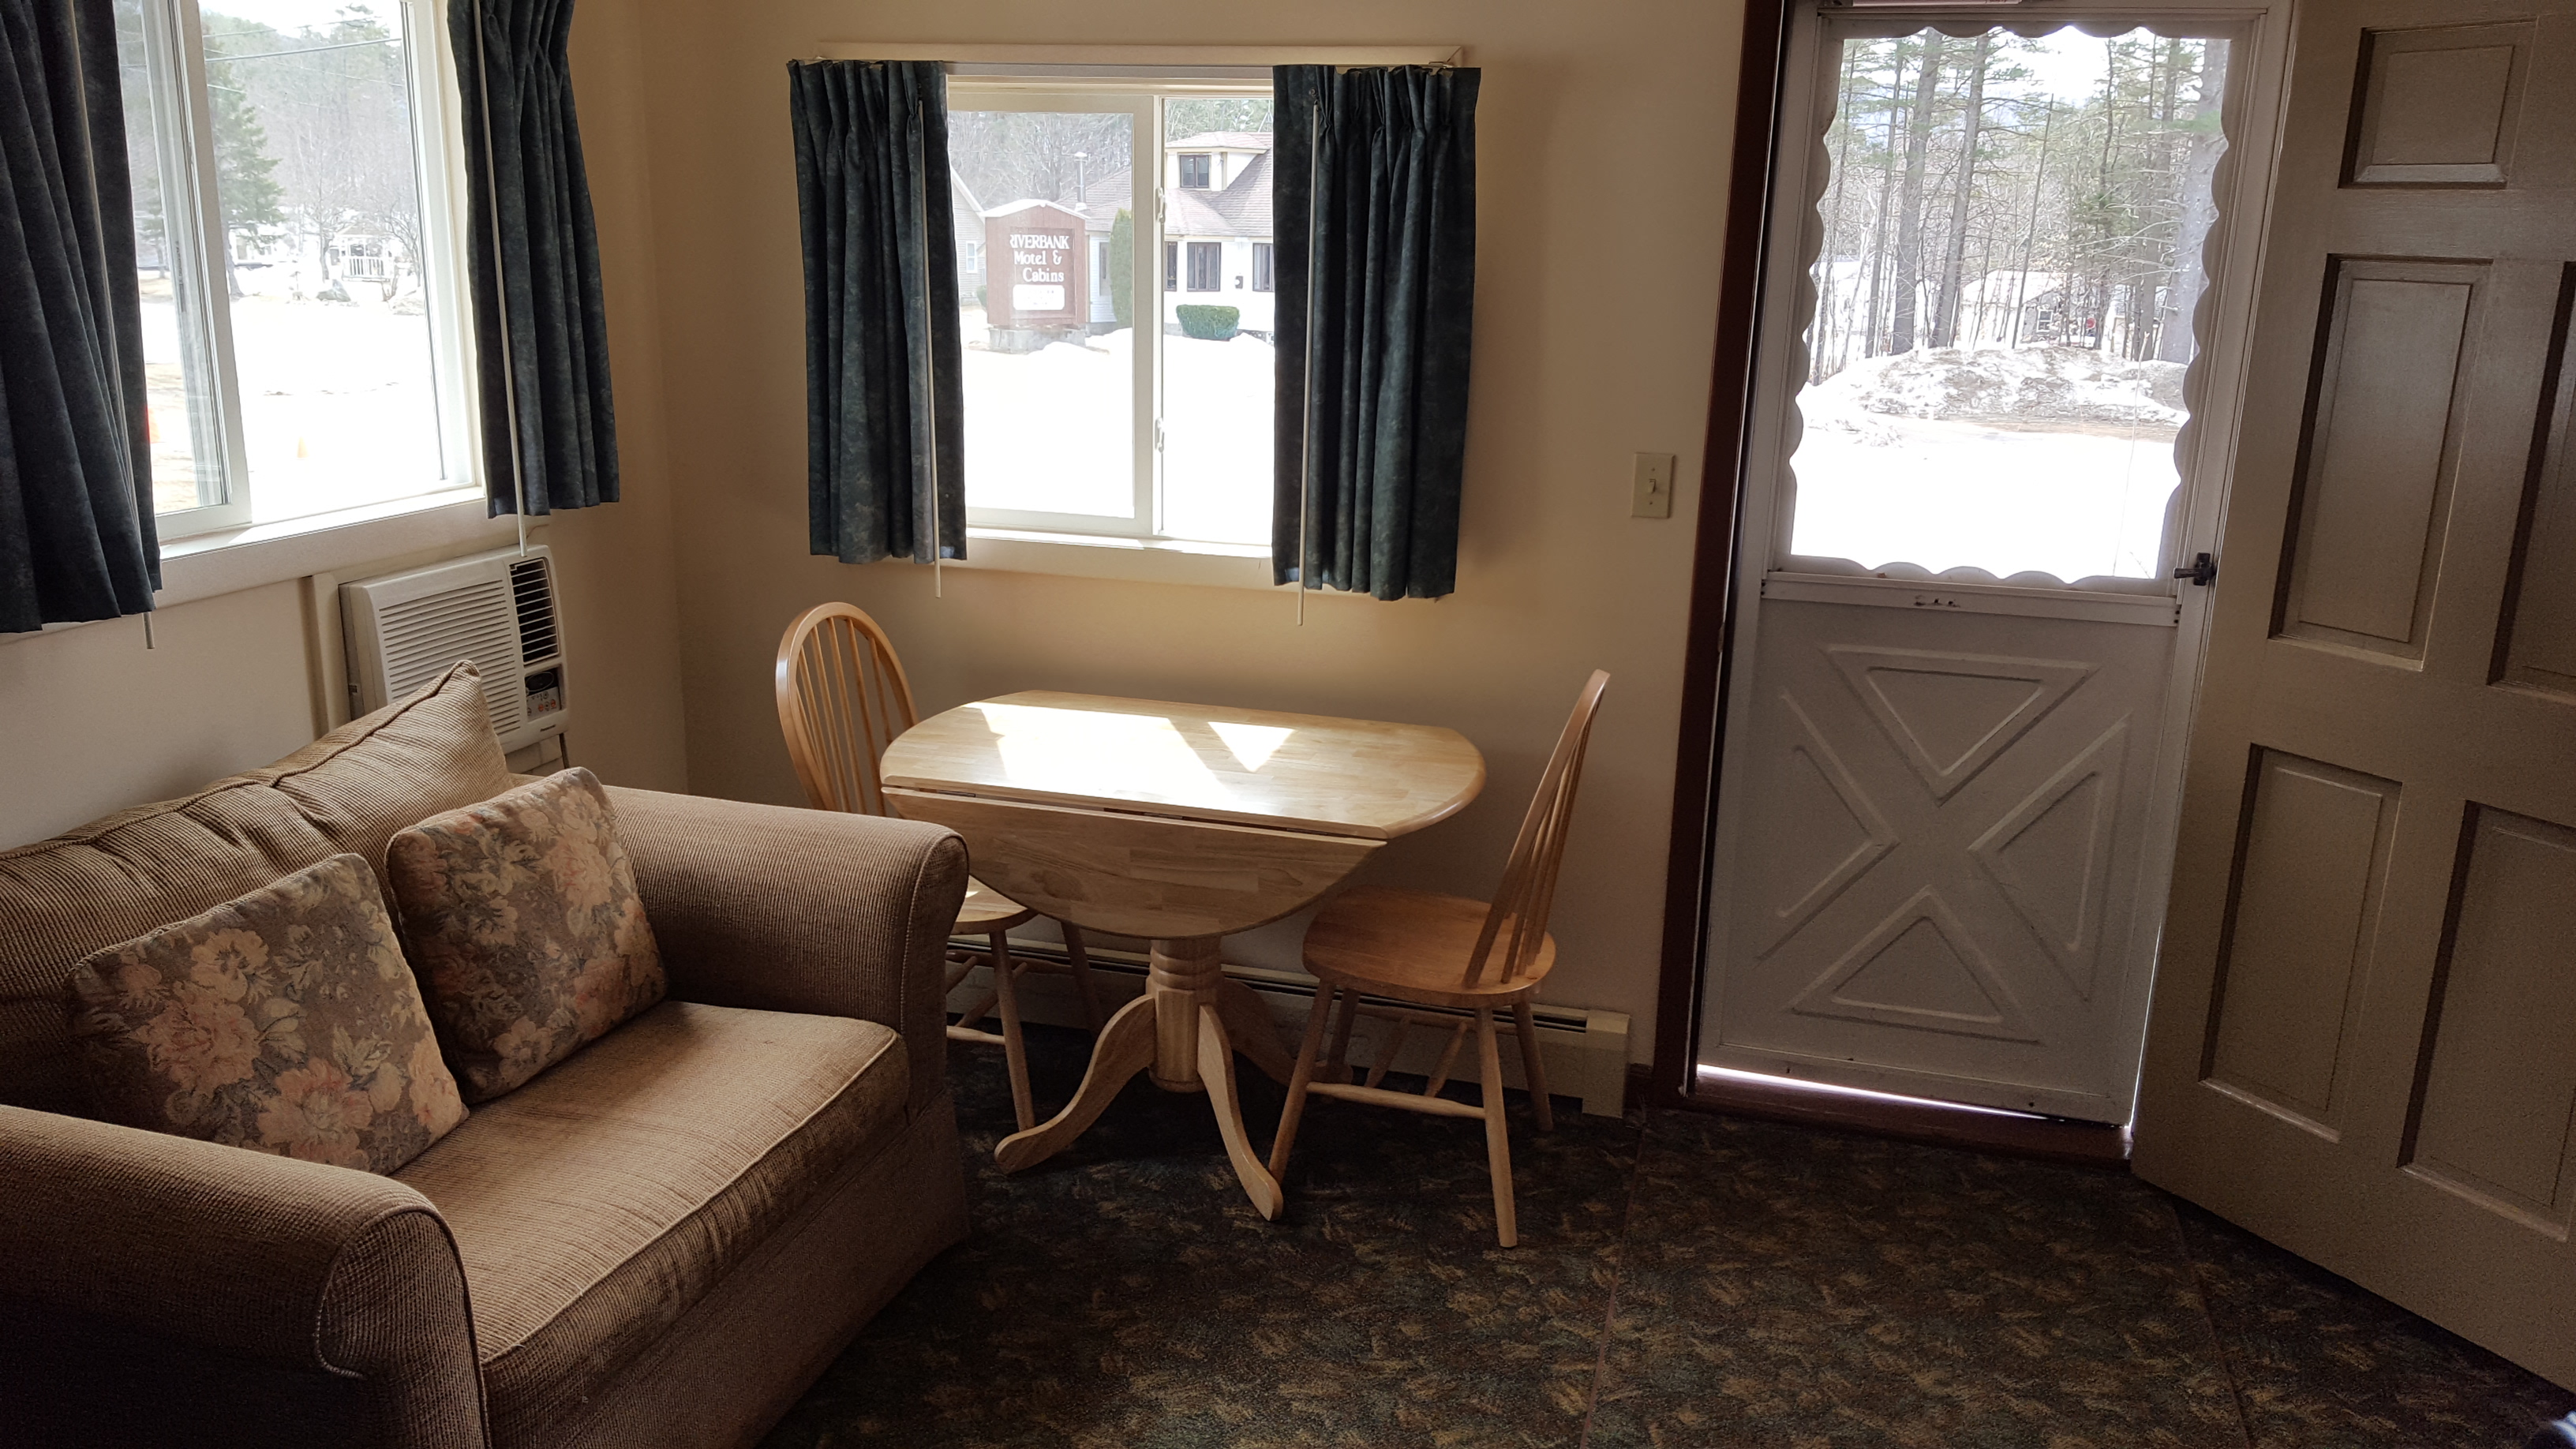 Motel room 2 dining table, loveseat and front door.